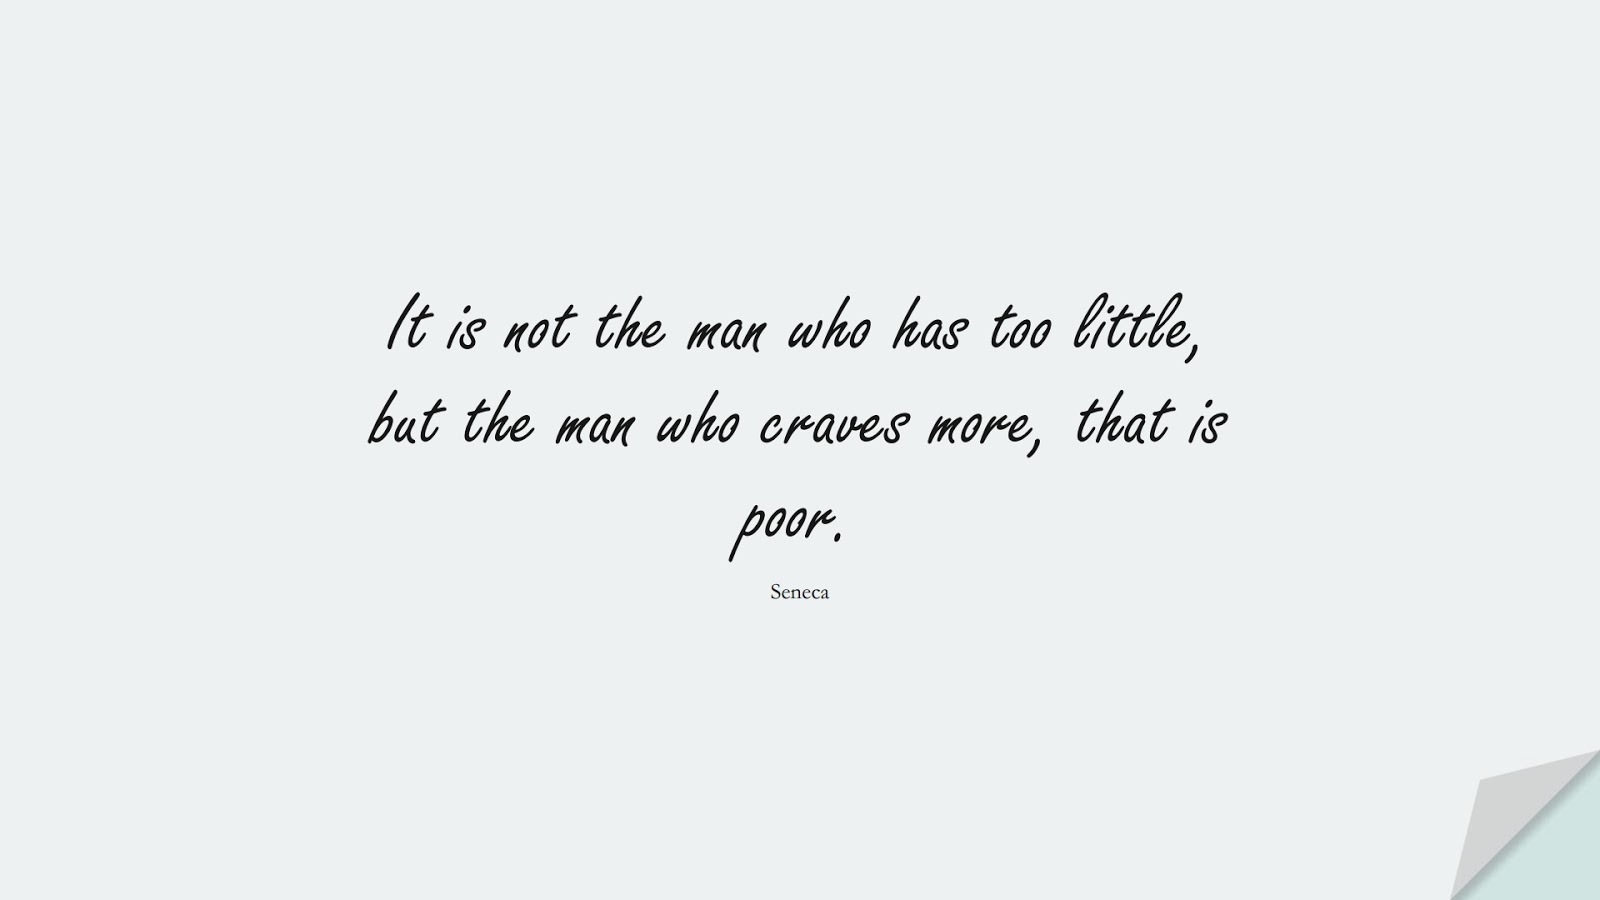 It is not the man who has too little, but the man who craves more, that is poor. (Seneca);  #WordsofWisdom